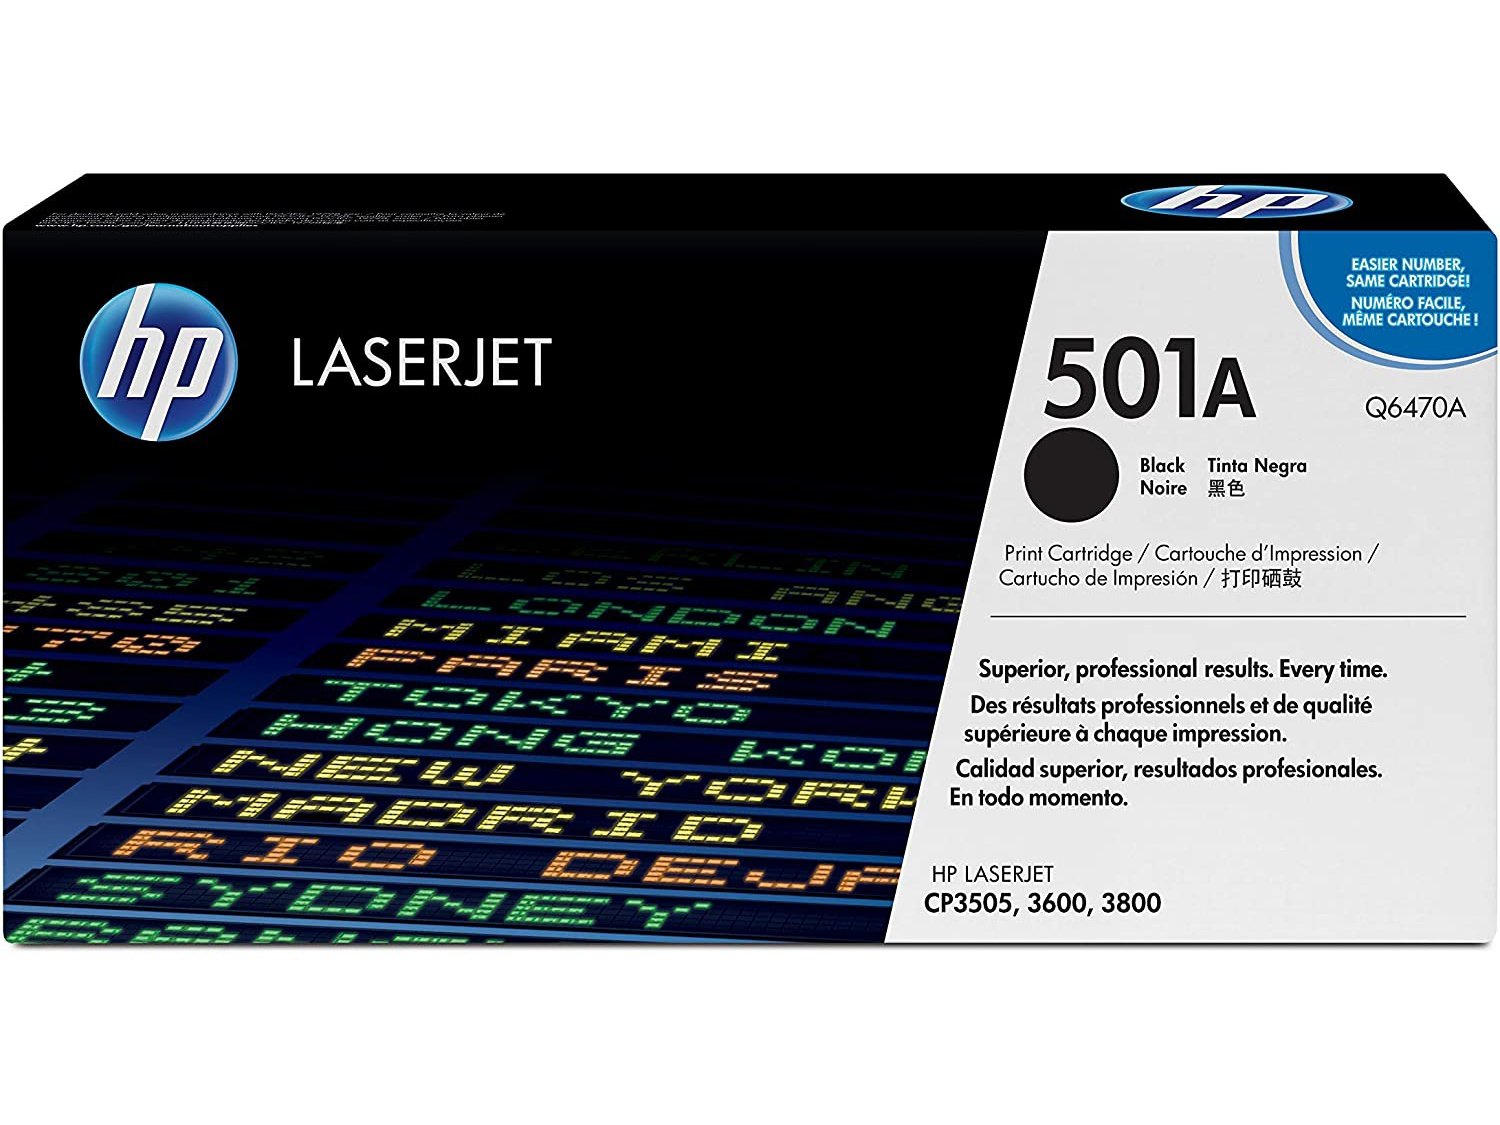 ICU Compatible/ OEM Get HP ICUQ6470A Yields 6,000 Pages 501A Black Laser Toner Cartridge